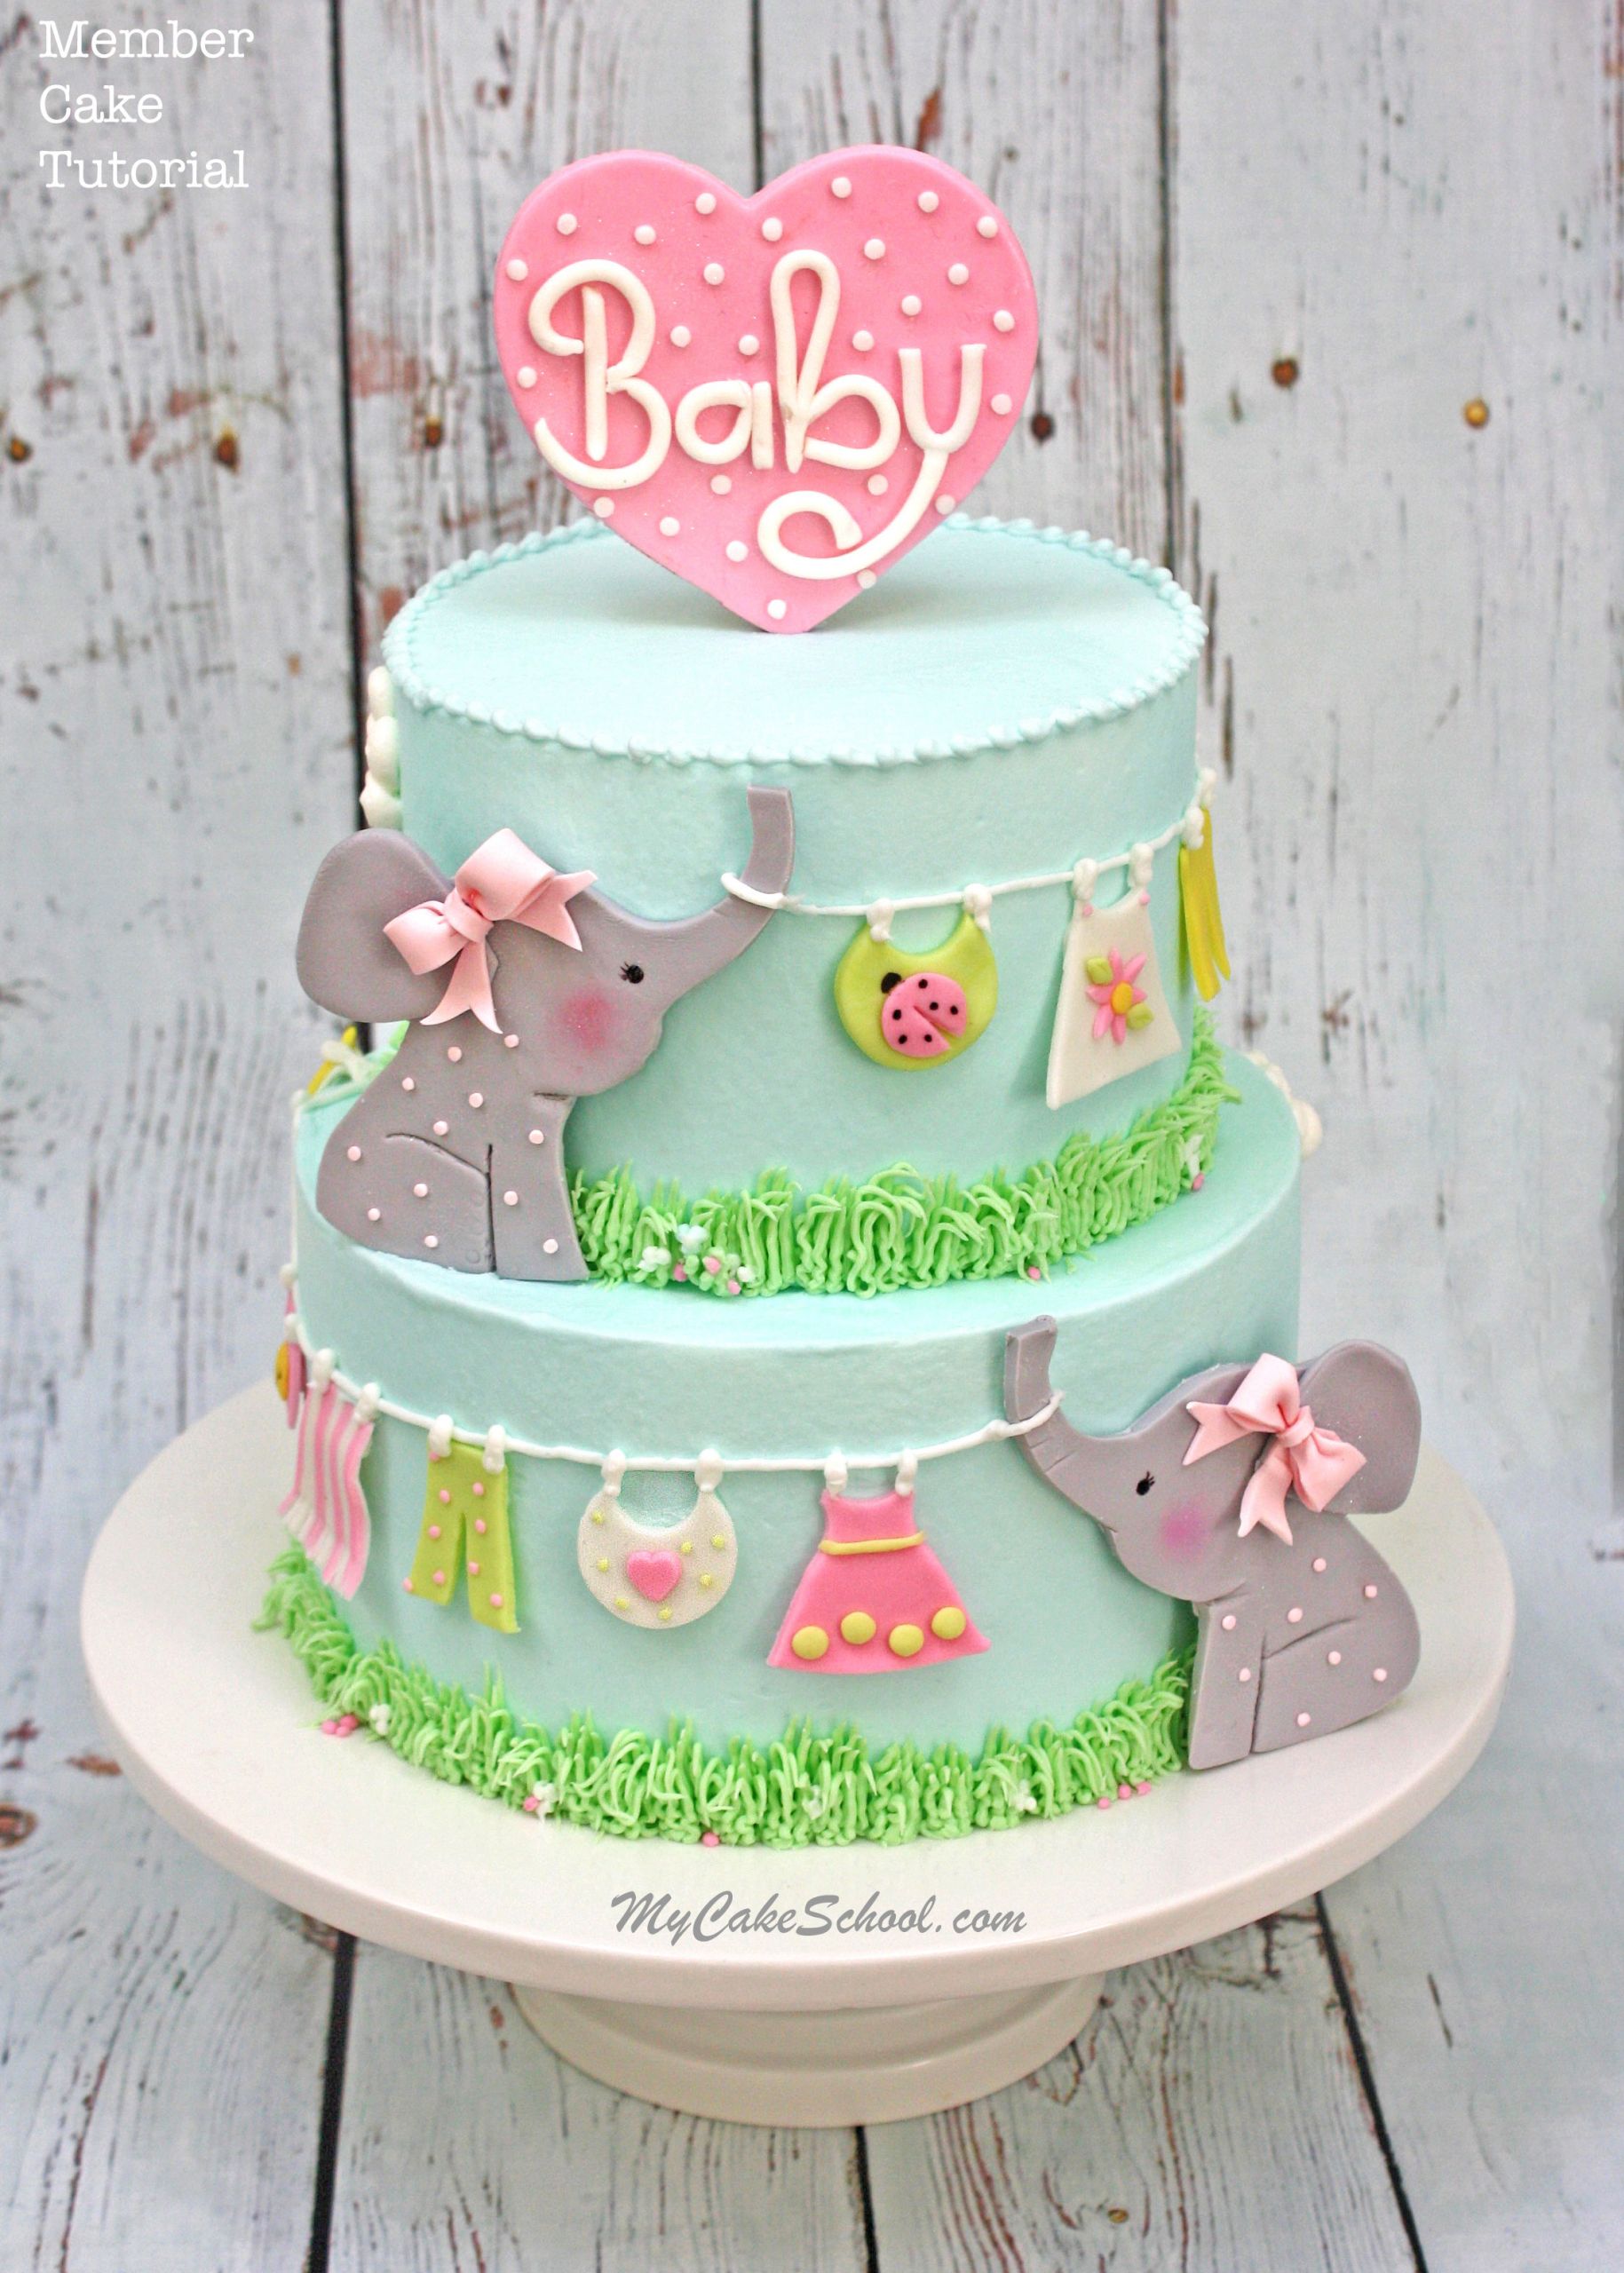 White Baby Shower Cake
 Roundup of the CUTEST Baby Shower Cakes Tutorials and